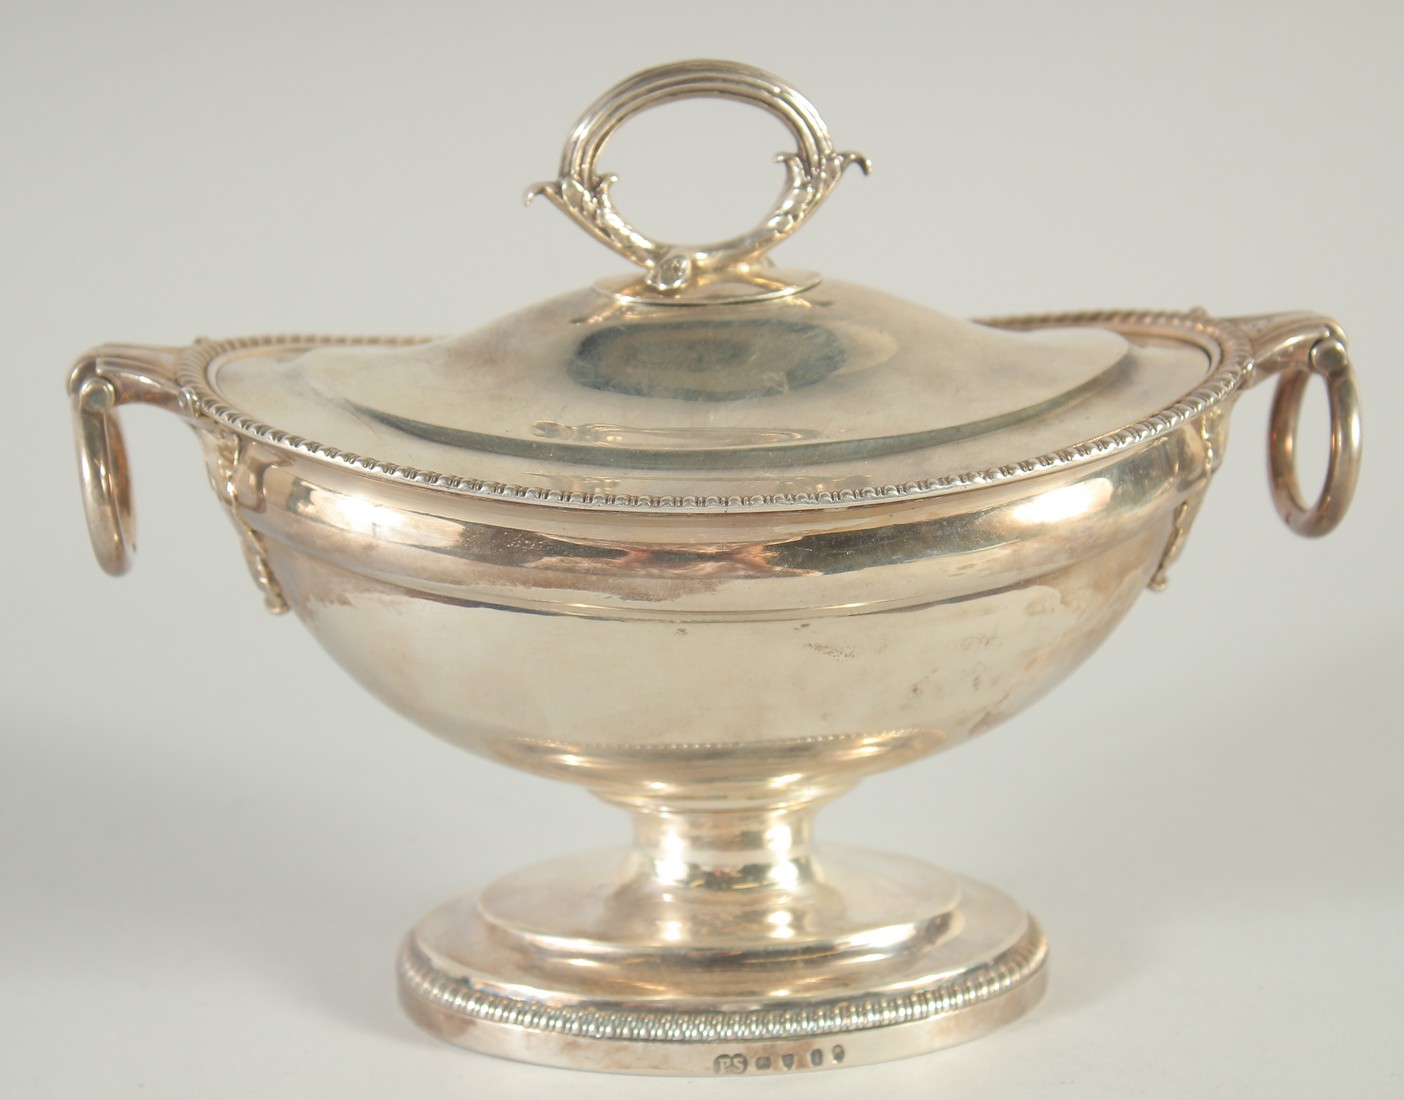 A GEORGE III OVAL SILVER SAUCE TUREEN AND COVER by PAUL STORR with gadrooned edges and ring handles.